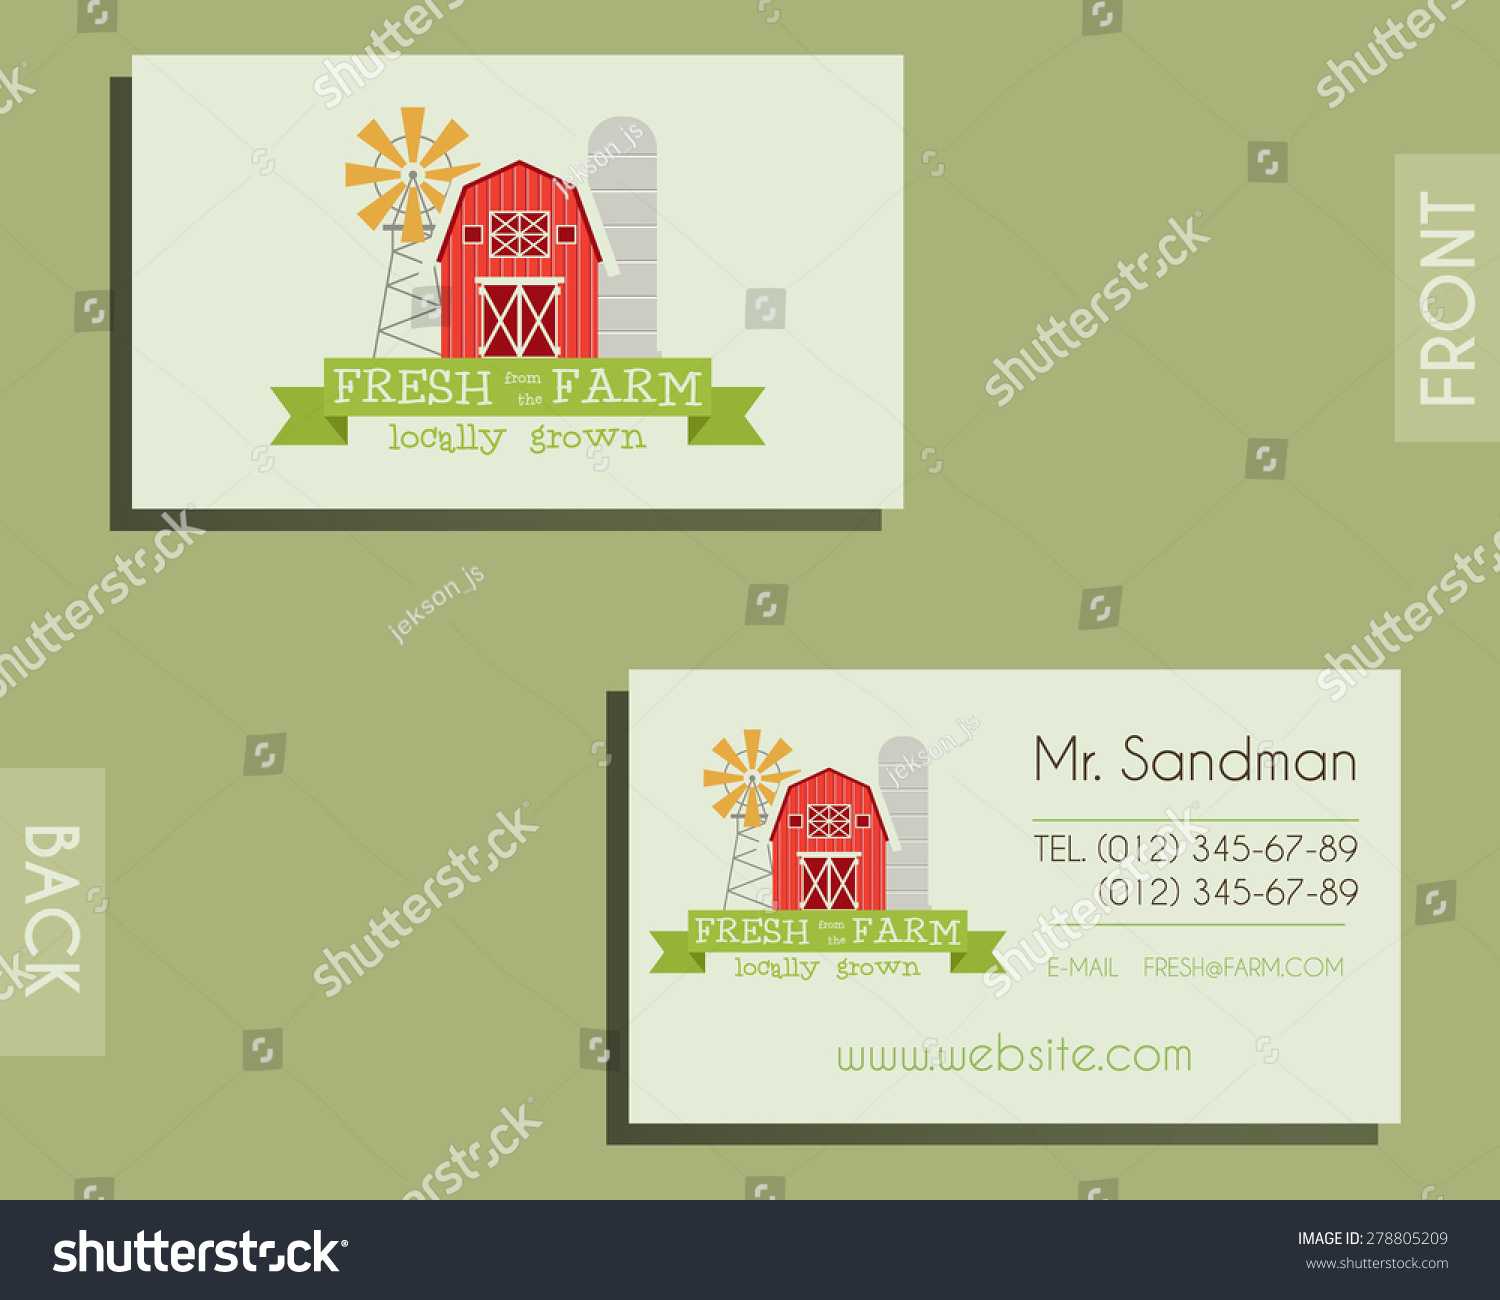 Eco Organic Visiting Card Template Natural Stock Vector Within Bio Card Template